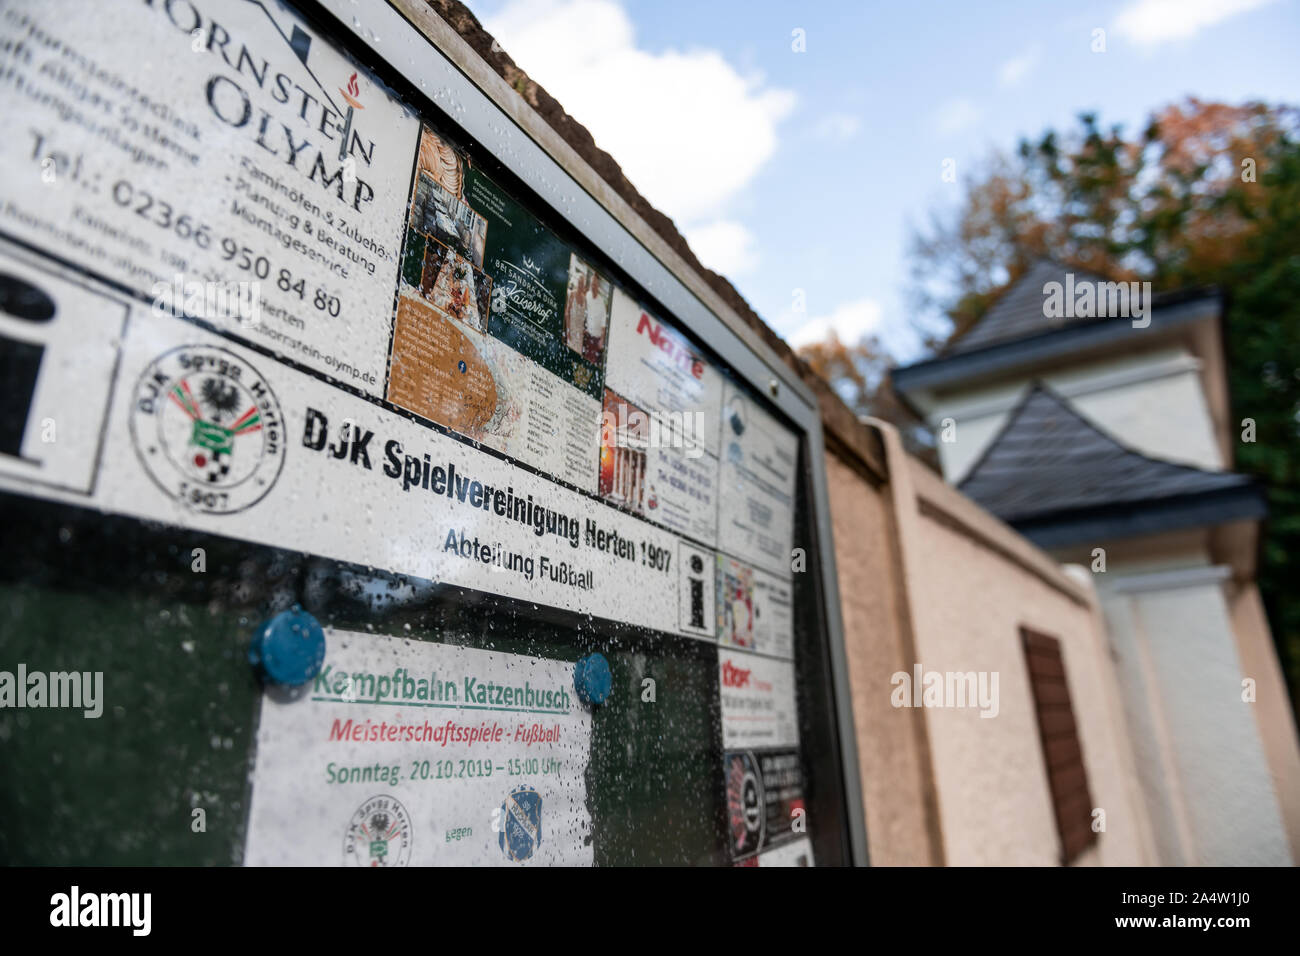 Recklinghausen, Germany. 16th Oct, 2019. The wall of the sports field  Katzenbruch of the DJK Spielvereinigung Herten 1907. The district  Recklinghausen has initiated a sports court case against three football  clubs. Players